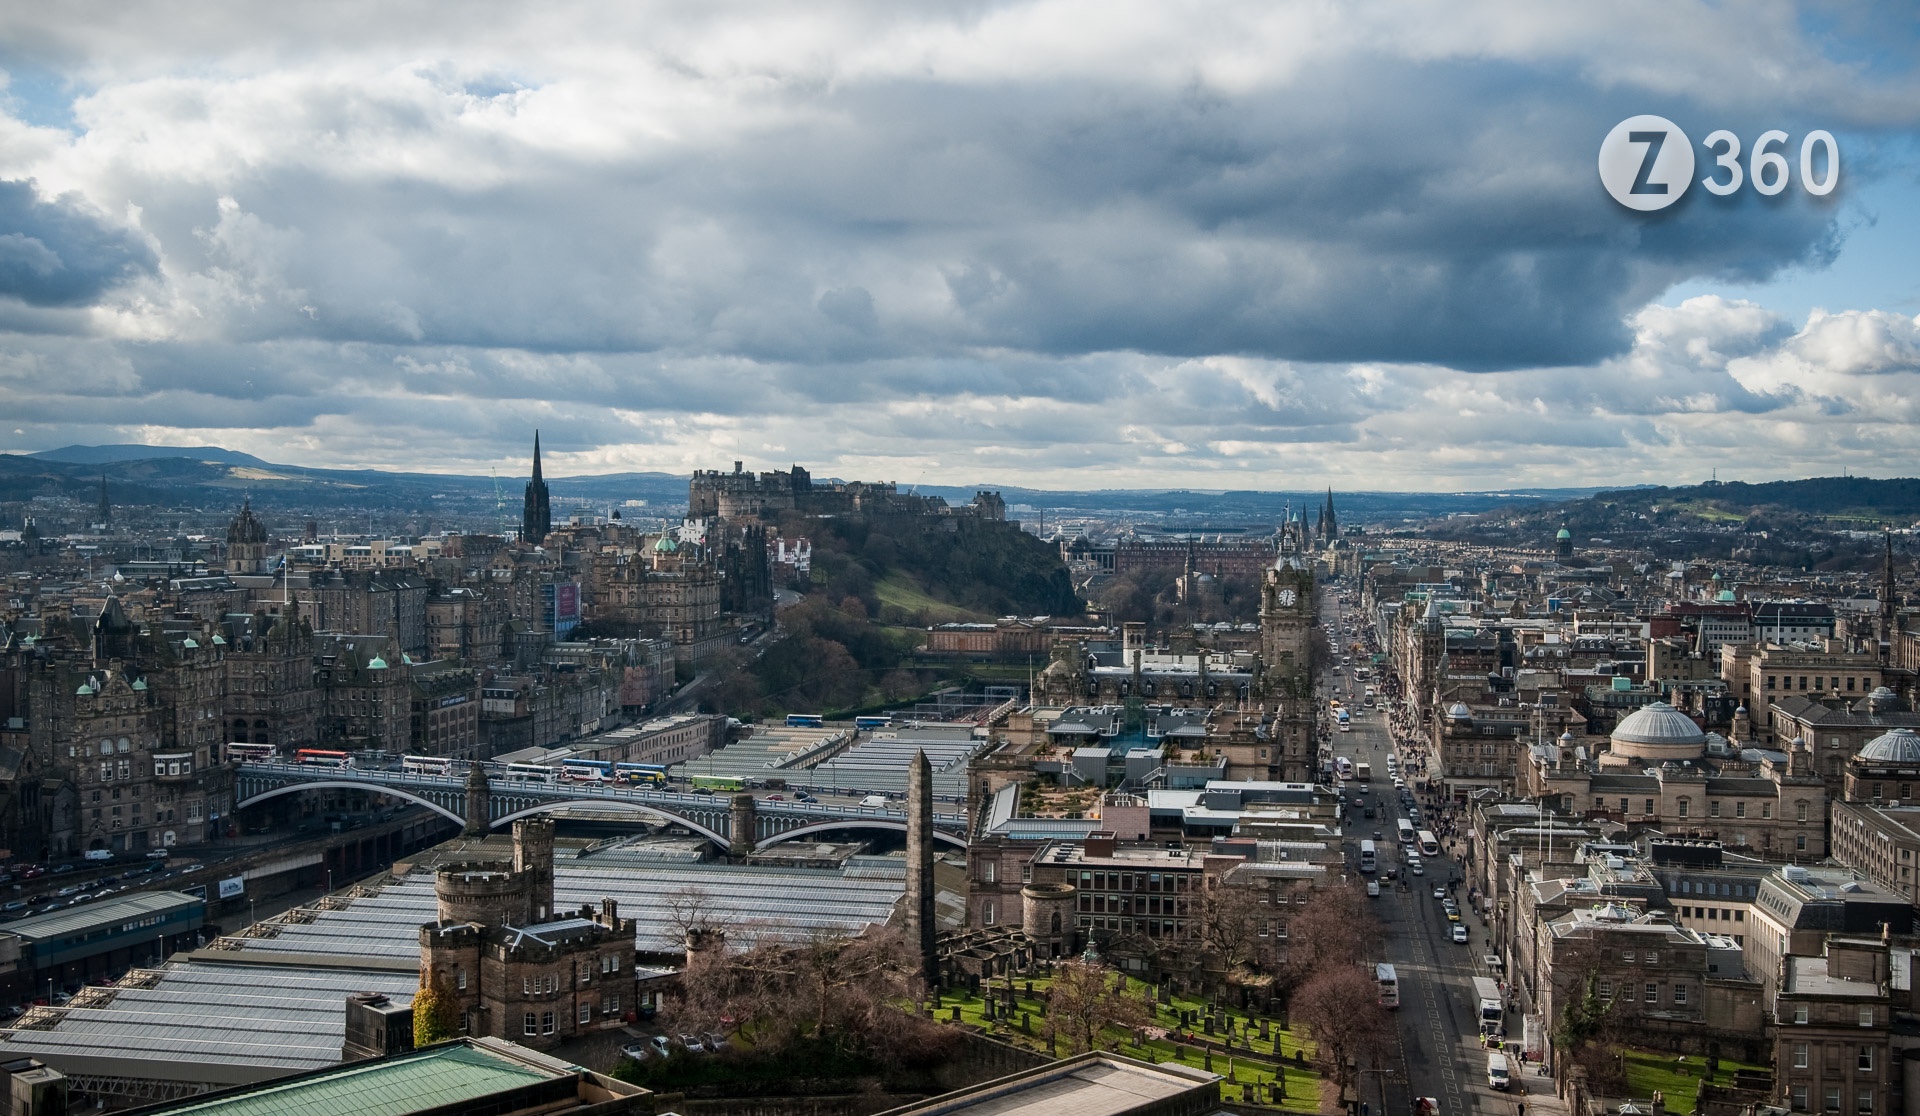 From Calton Hill